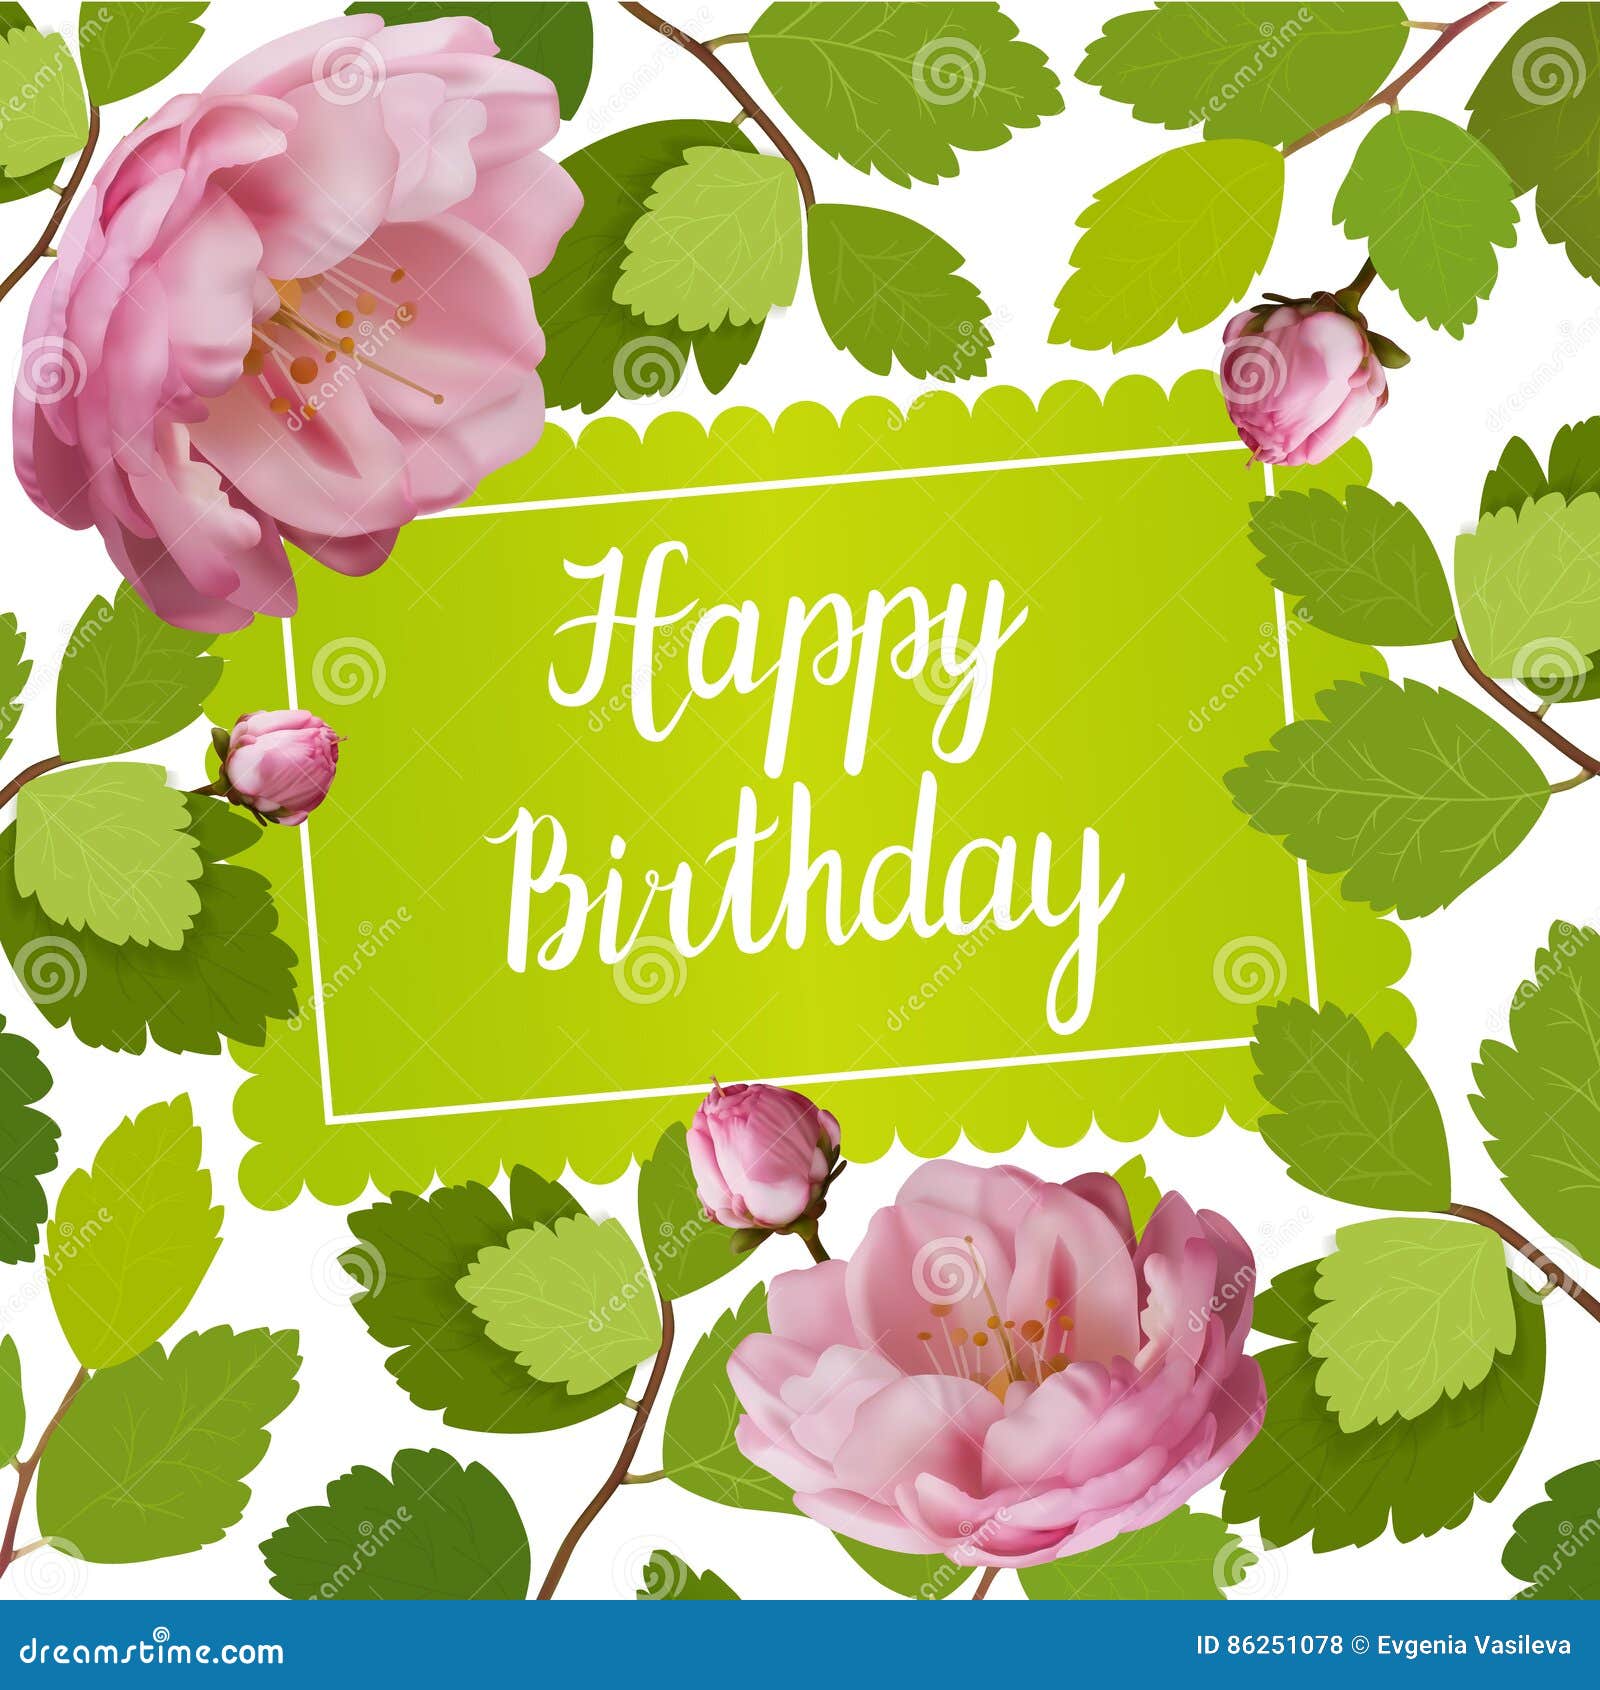 Beautiful Greeting Card on Happy Birthday with Spring Roses and